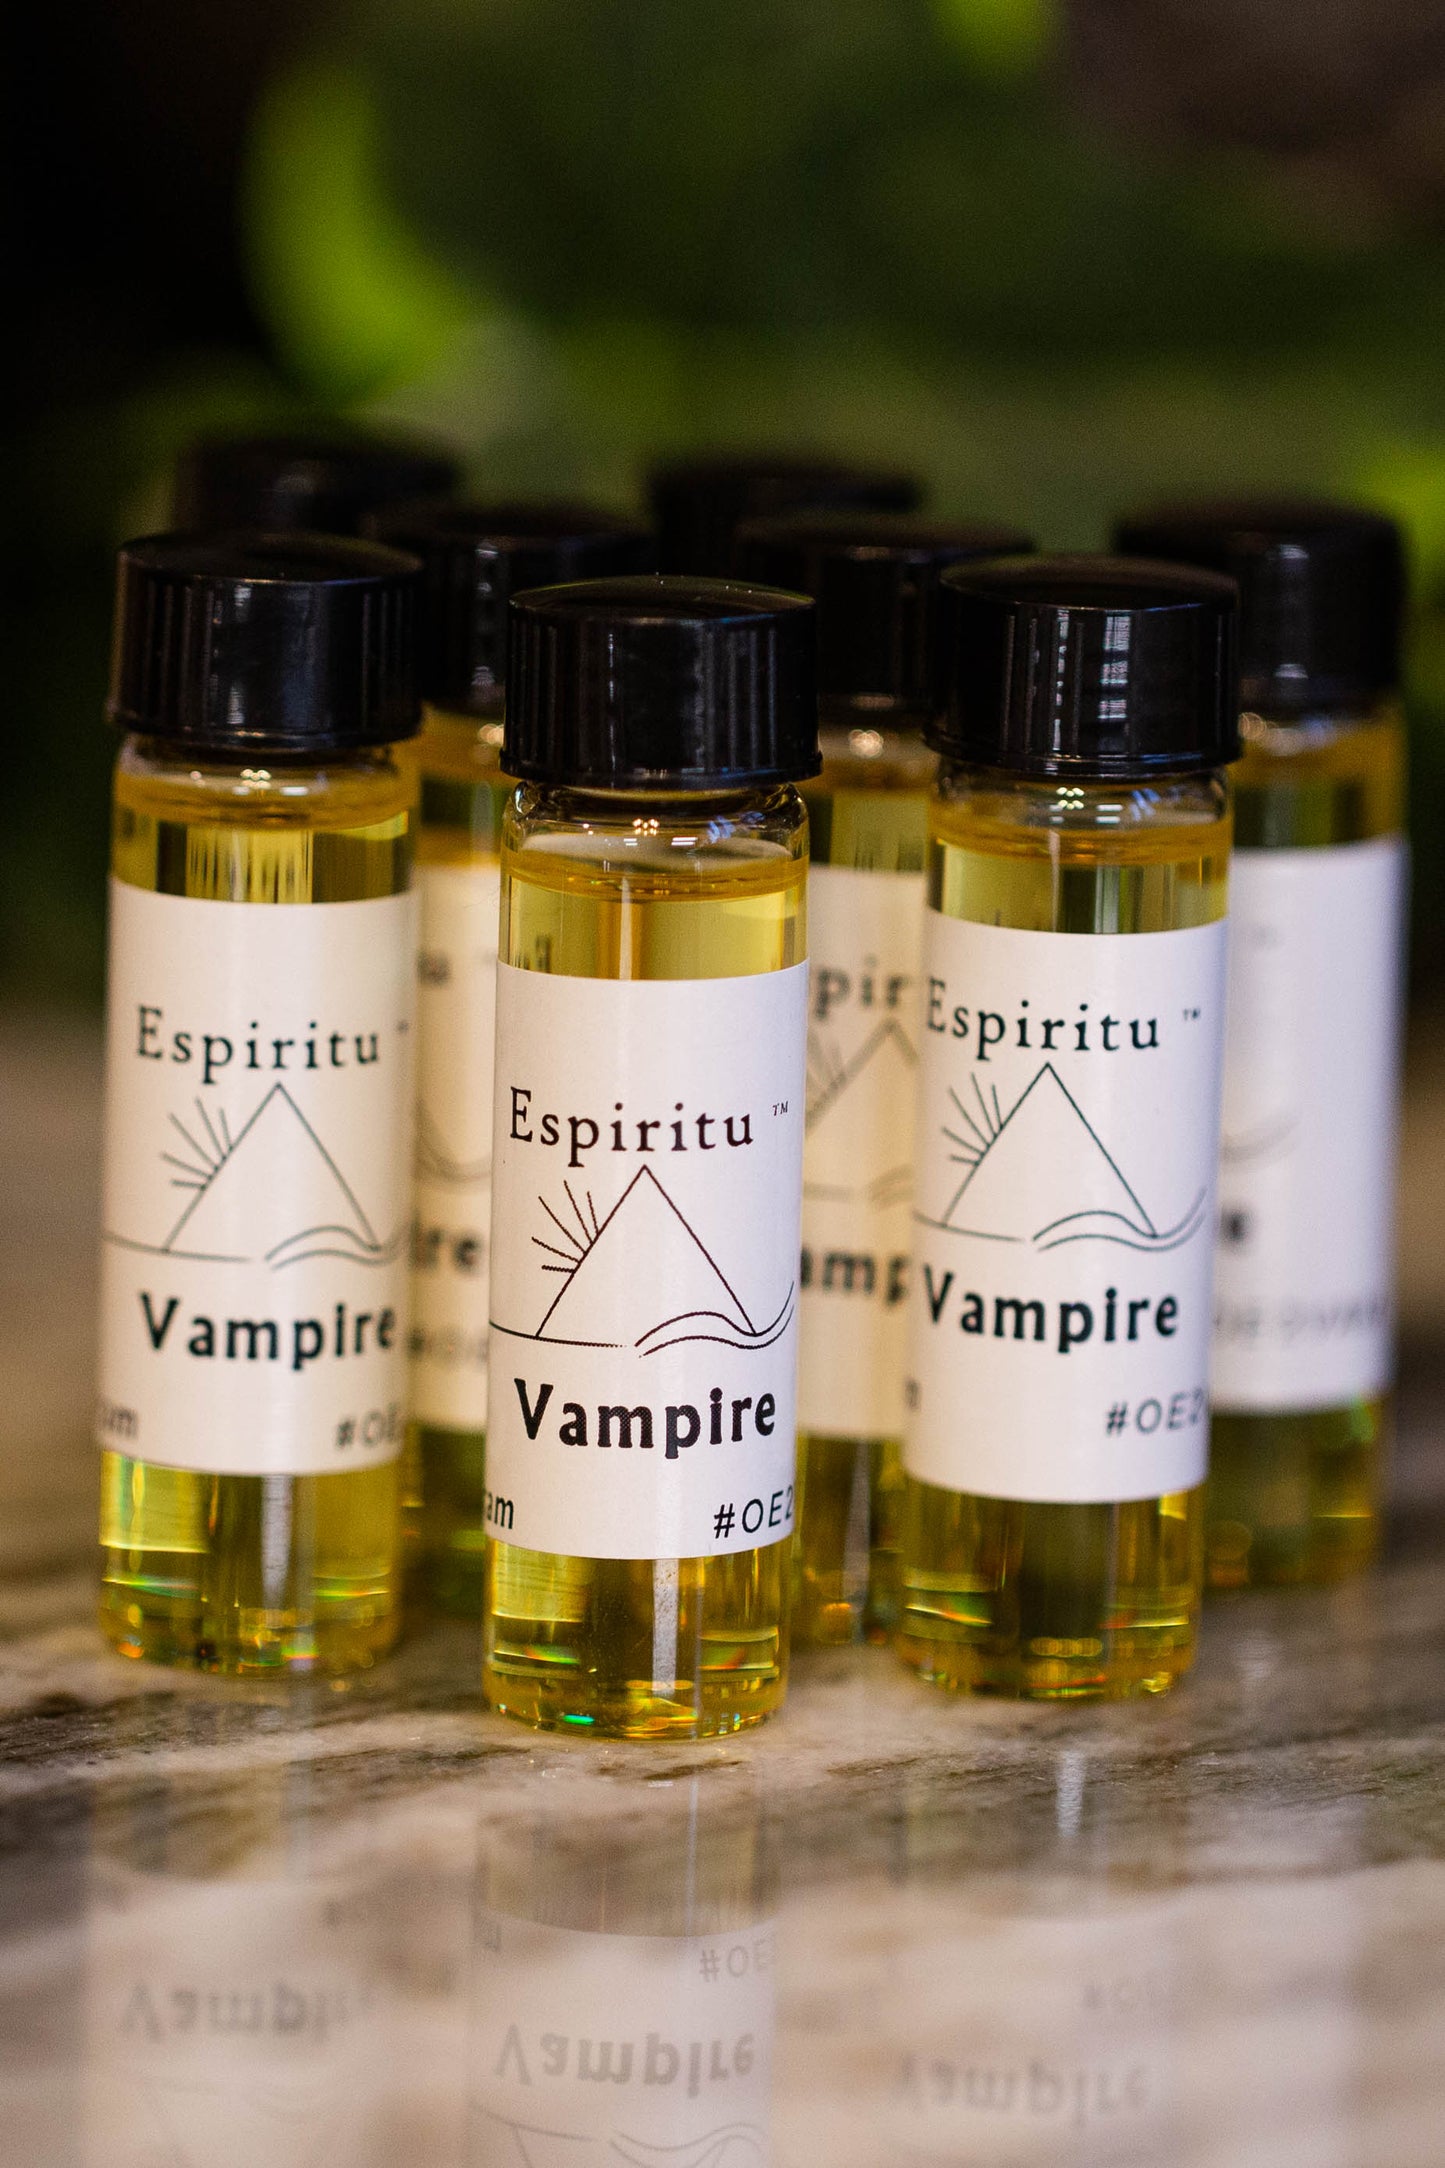 Espiritu - VAMPIRE - Conjure Oil for taking control of a situation, beauty, youth, or vengeance